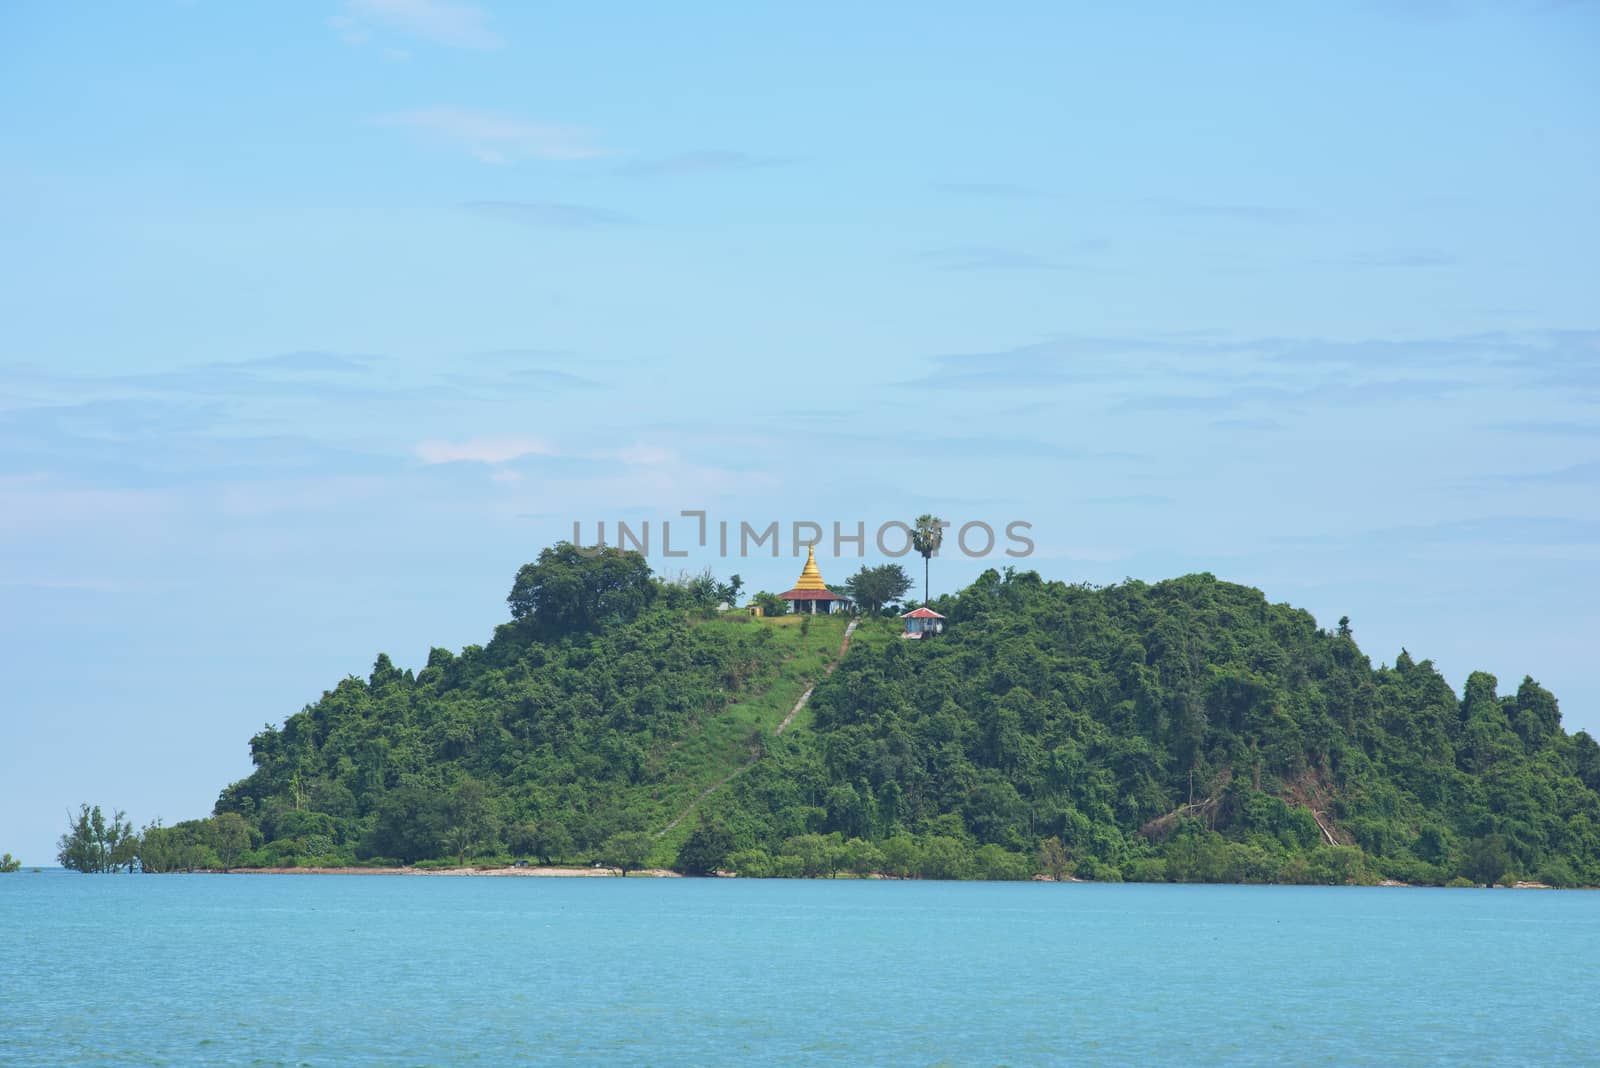 Buddhist pagoda at the peak of one of the islands of the Myeik Archipelago in the Tanintharyi Region of Myanmar.